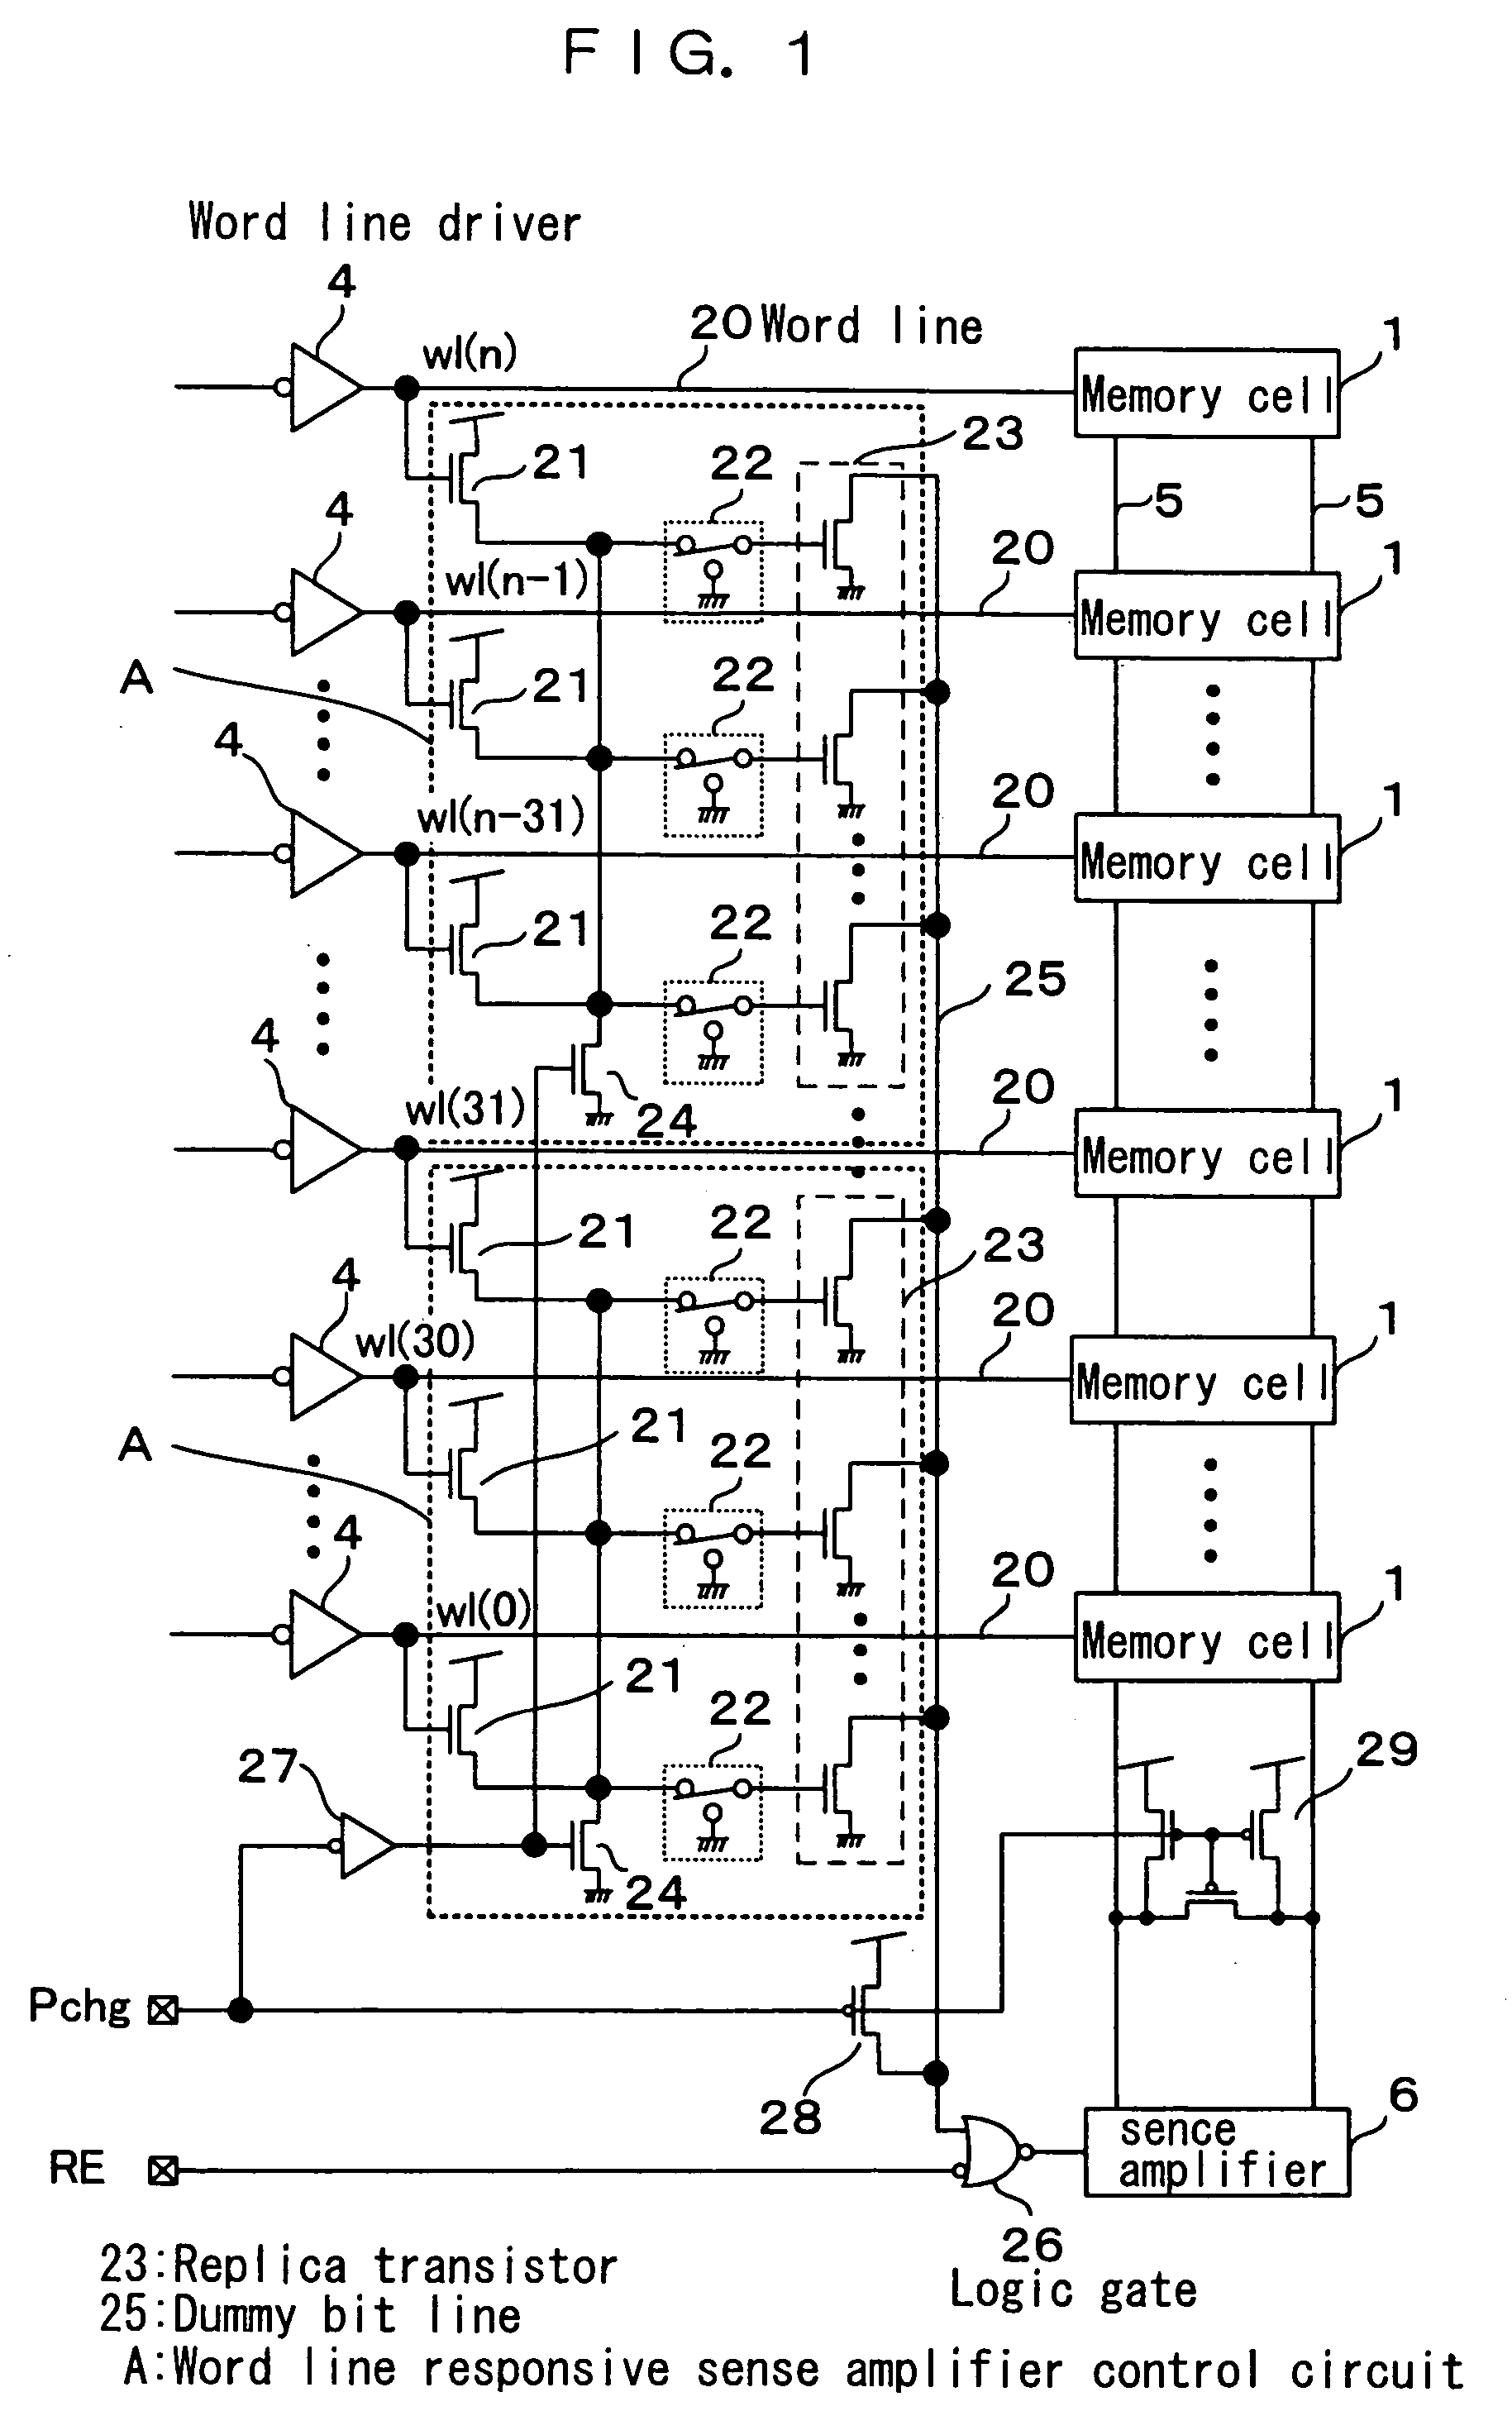 Semiconductor memory storage device capable of high operating speed